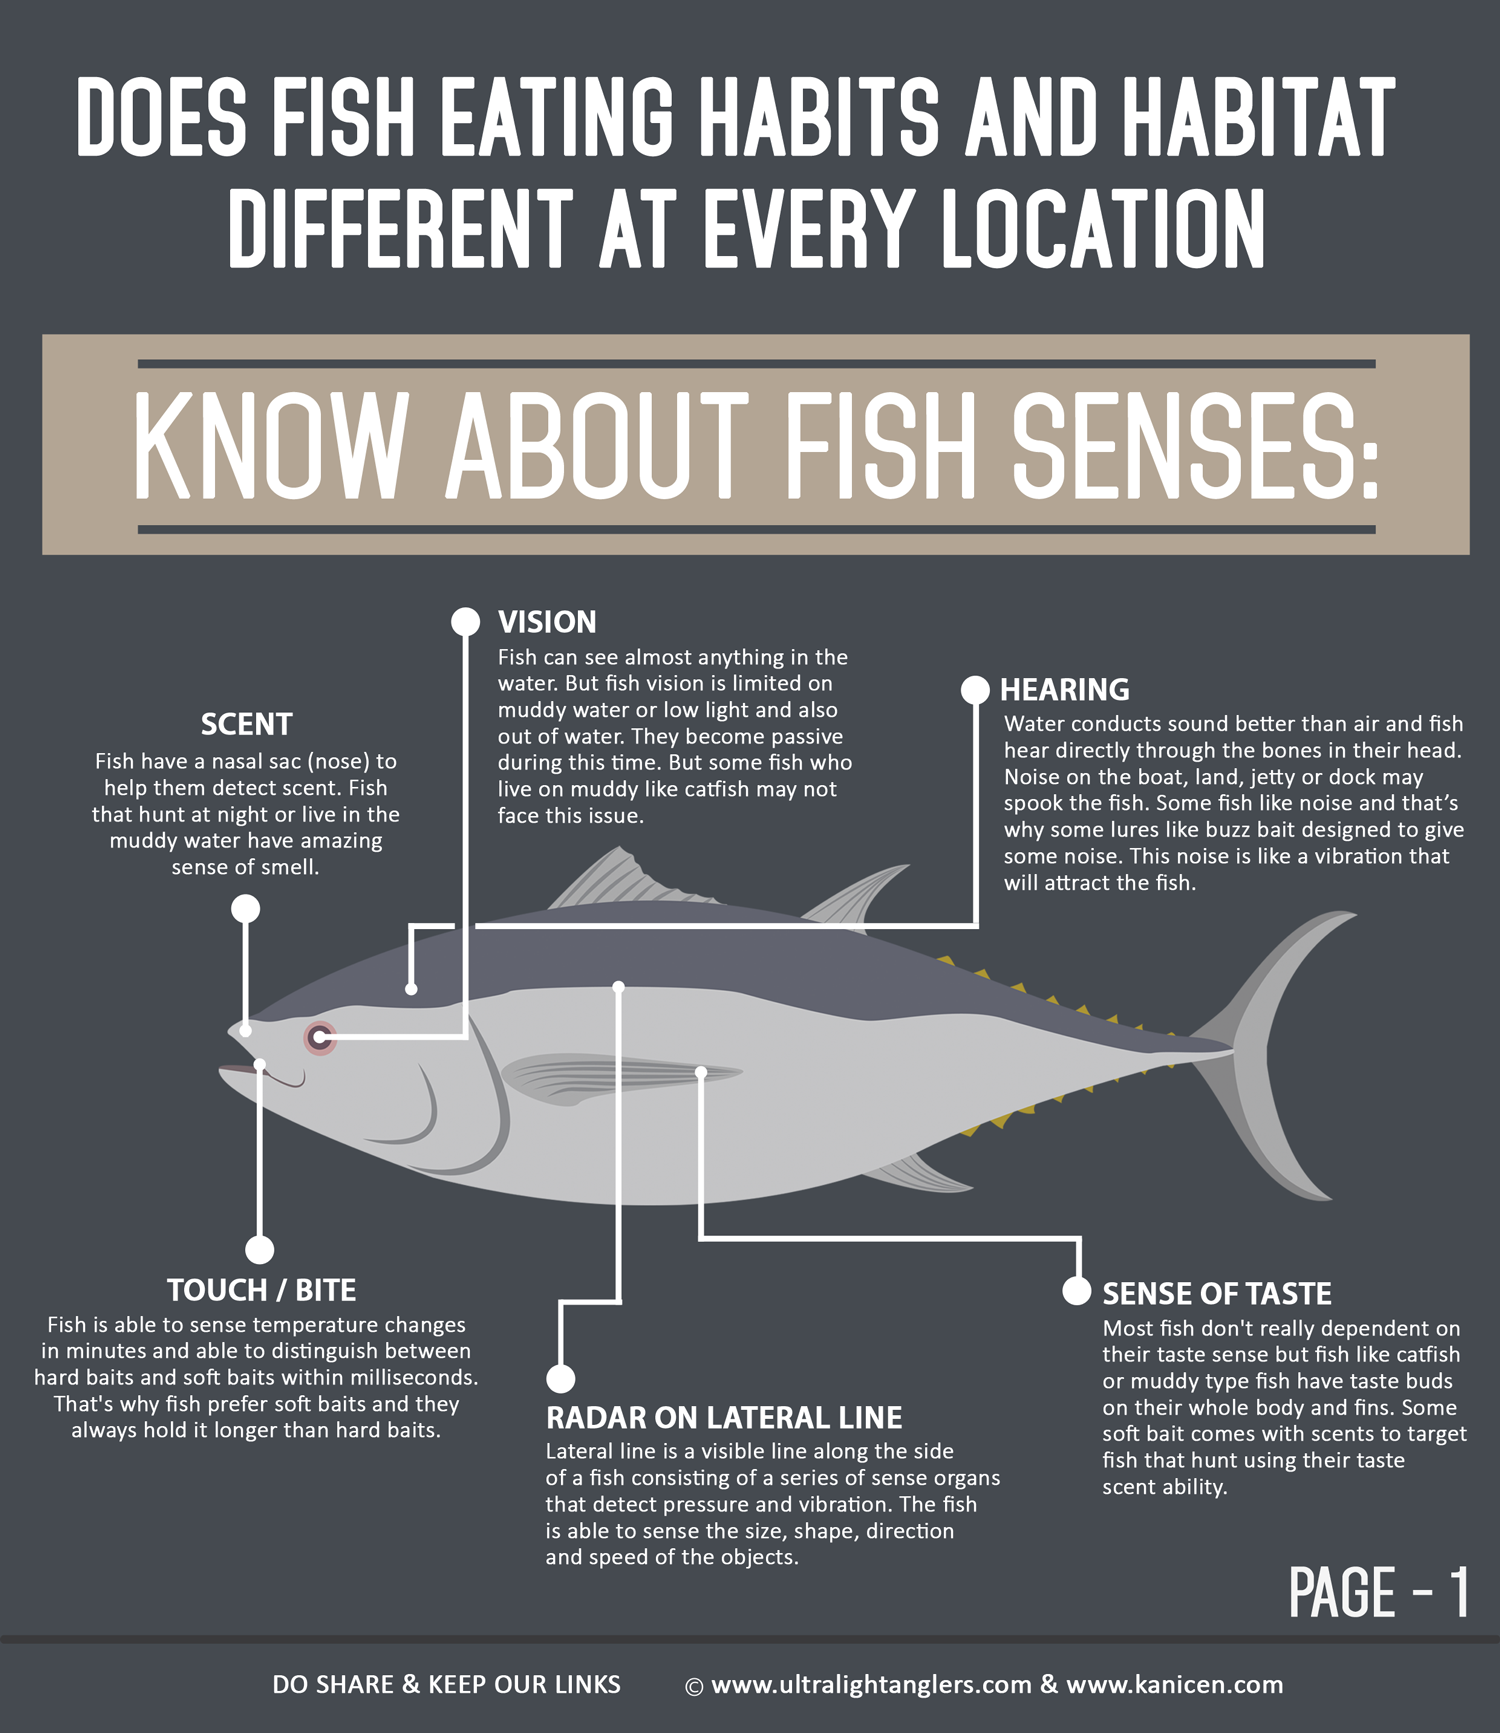 Does Fish Eating Habits and Habitat Different at Every Location?